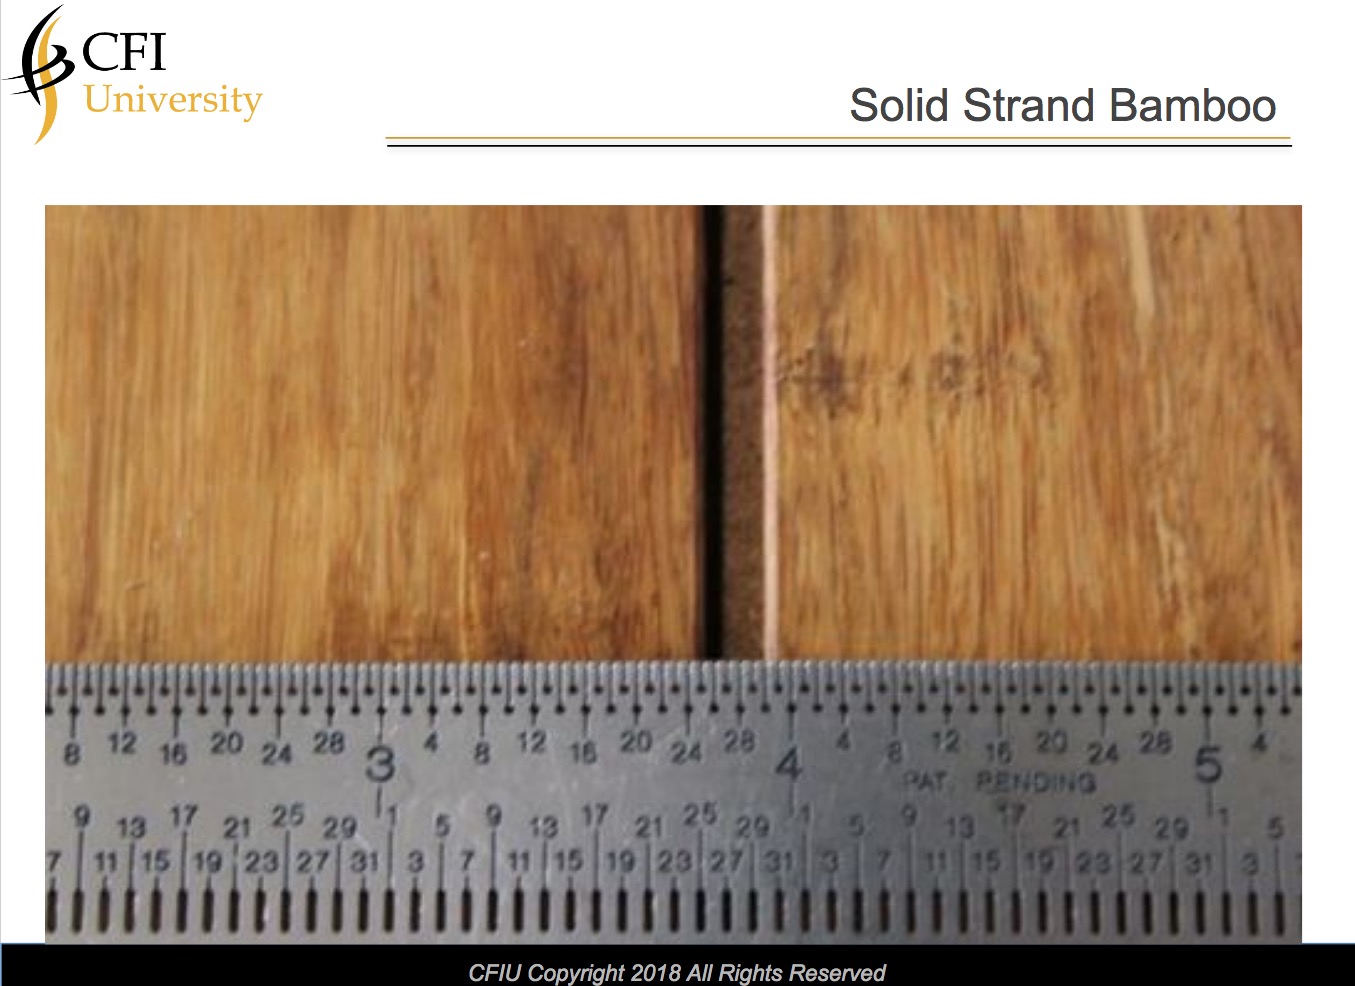 Bamboo, Solid Strand- Course & Exam